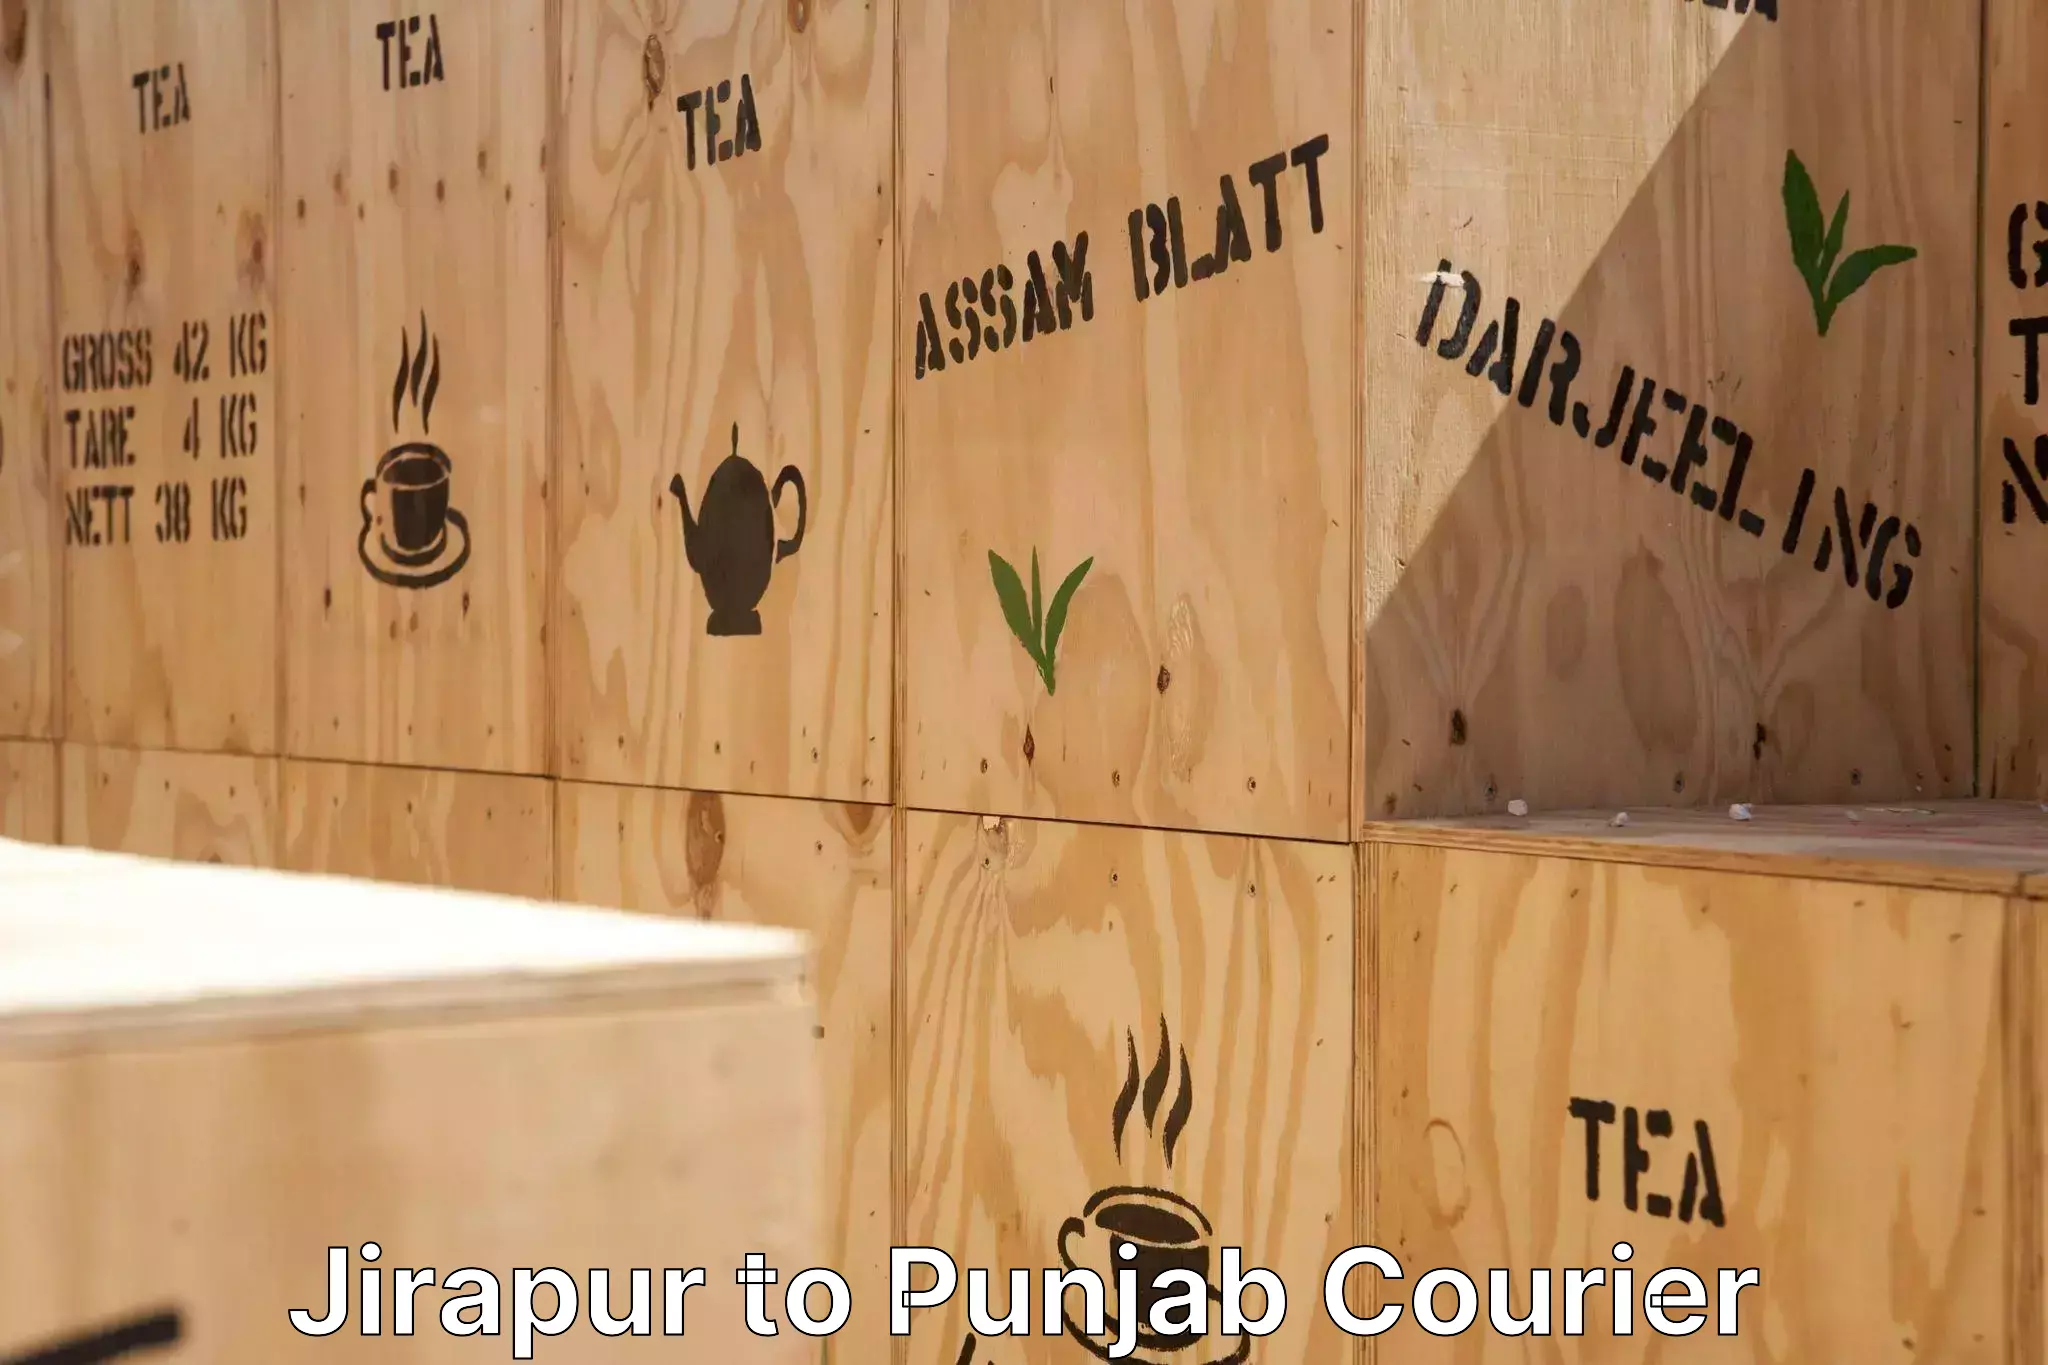 Trusted relocation experts Jirapur to Punjab